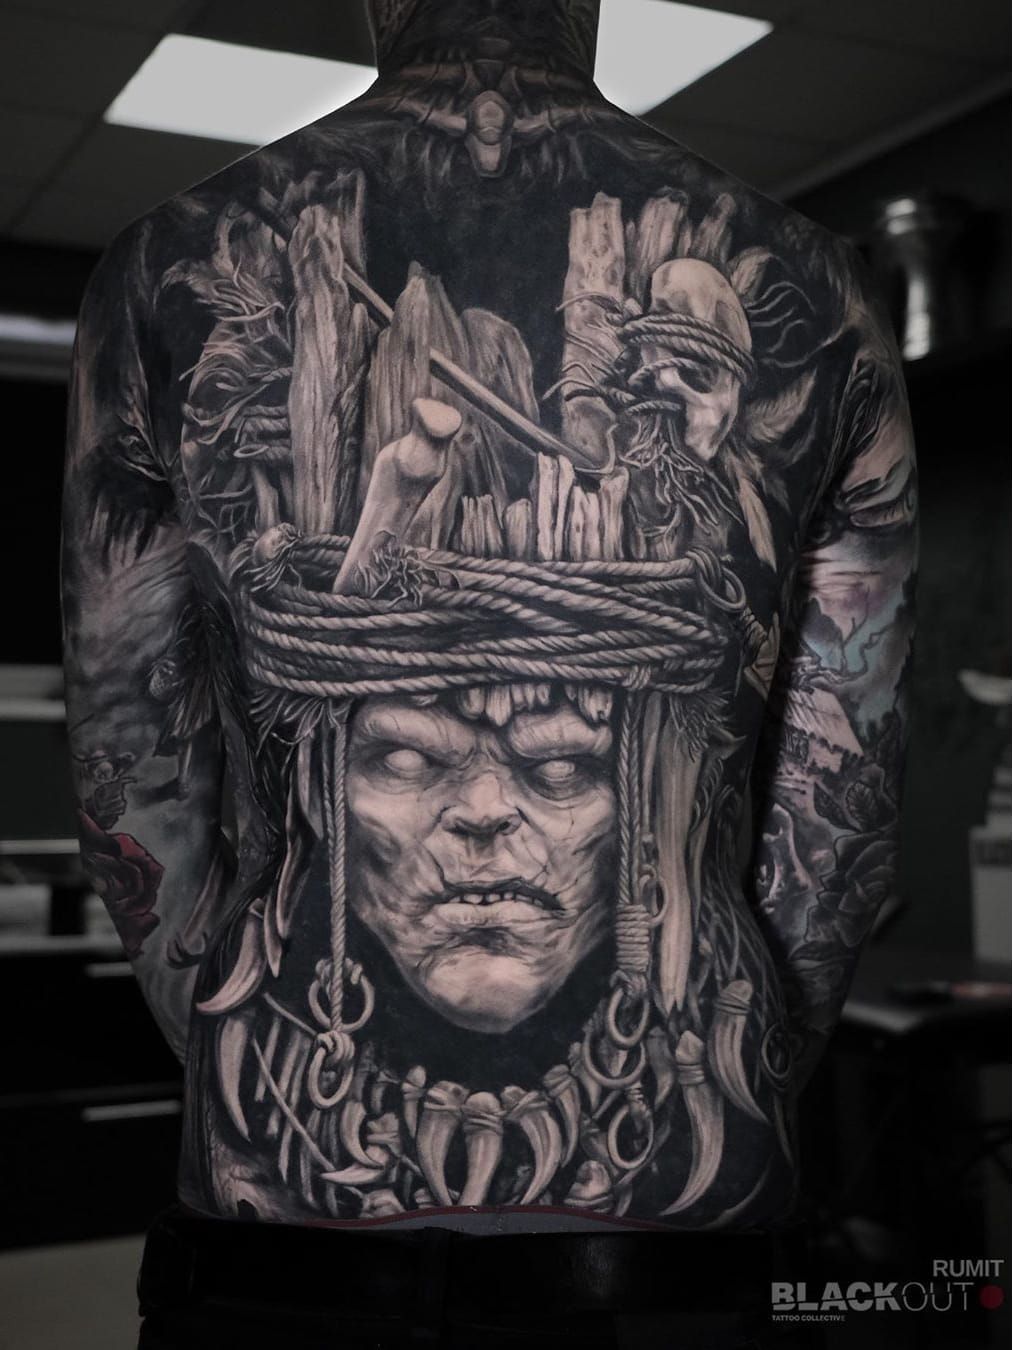 Tattoos by Chopper - Tattoos, Japanese Imagery